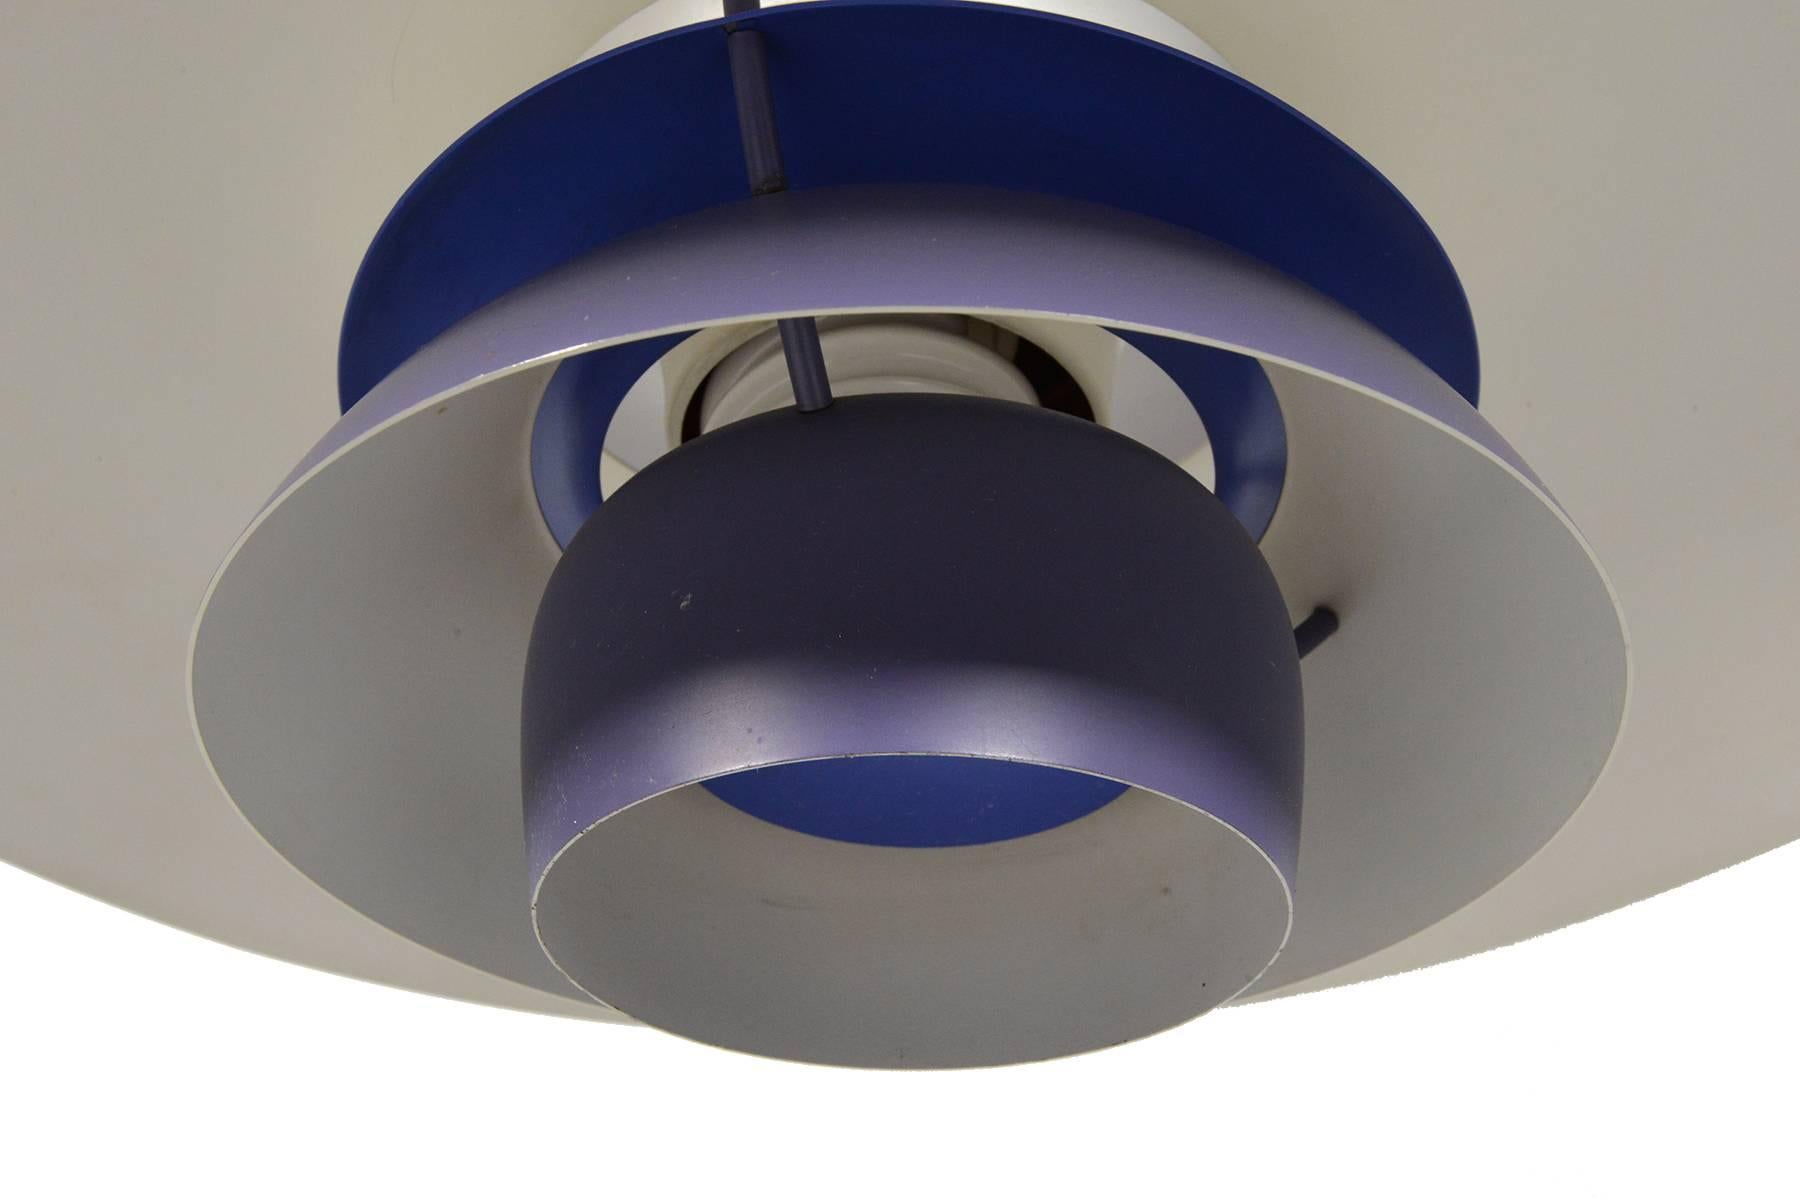 Designed in 1958 by Poul Henningsen for Louis Poulsen, this revolutionary lamp was designed with the home in mind. The purple and white banding diffuses light for a soft, warm tone. In excellent original condition with typical wear for its